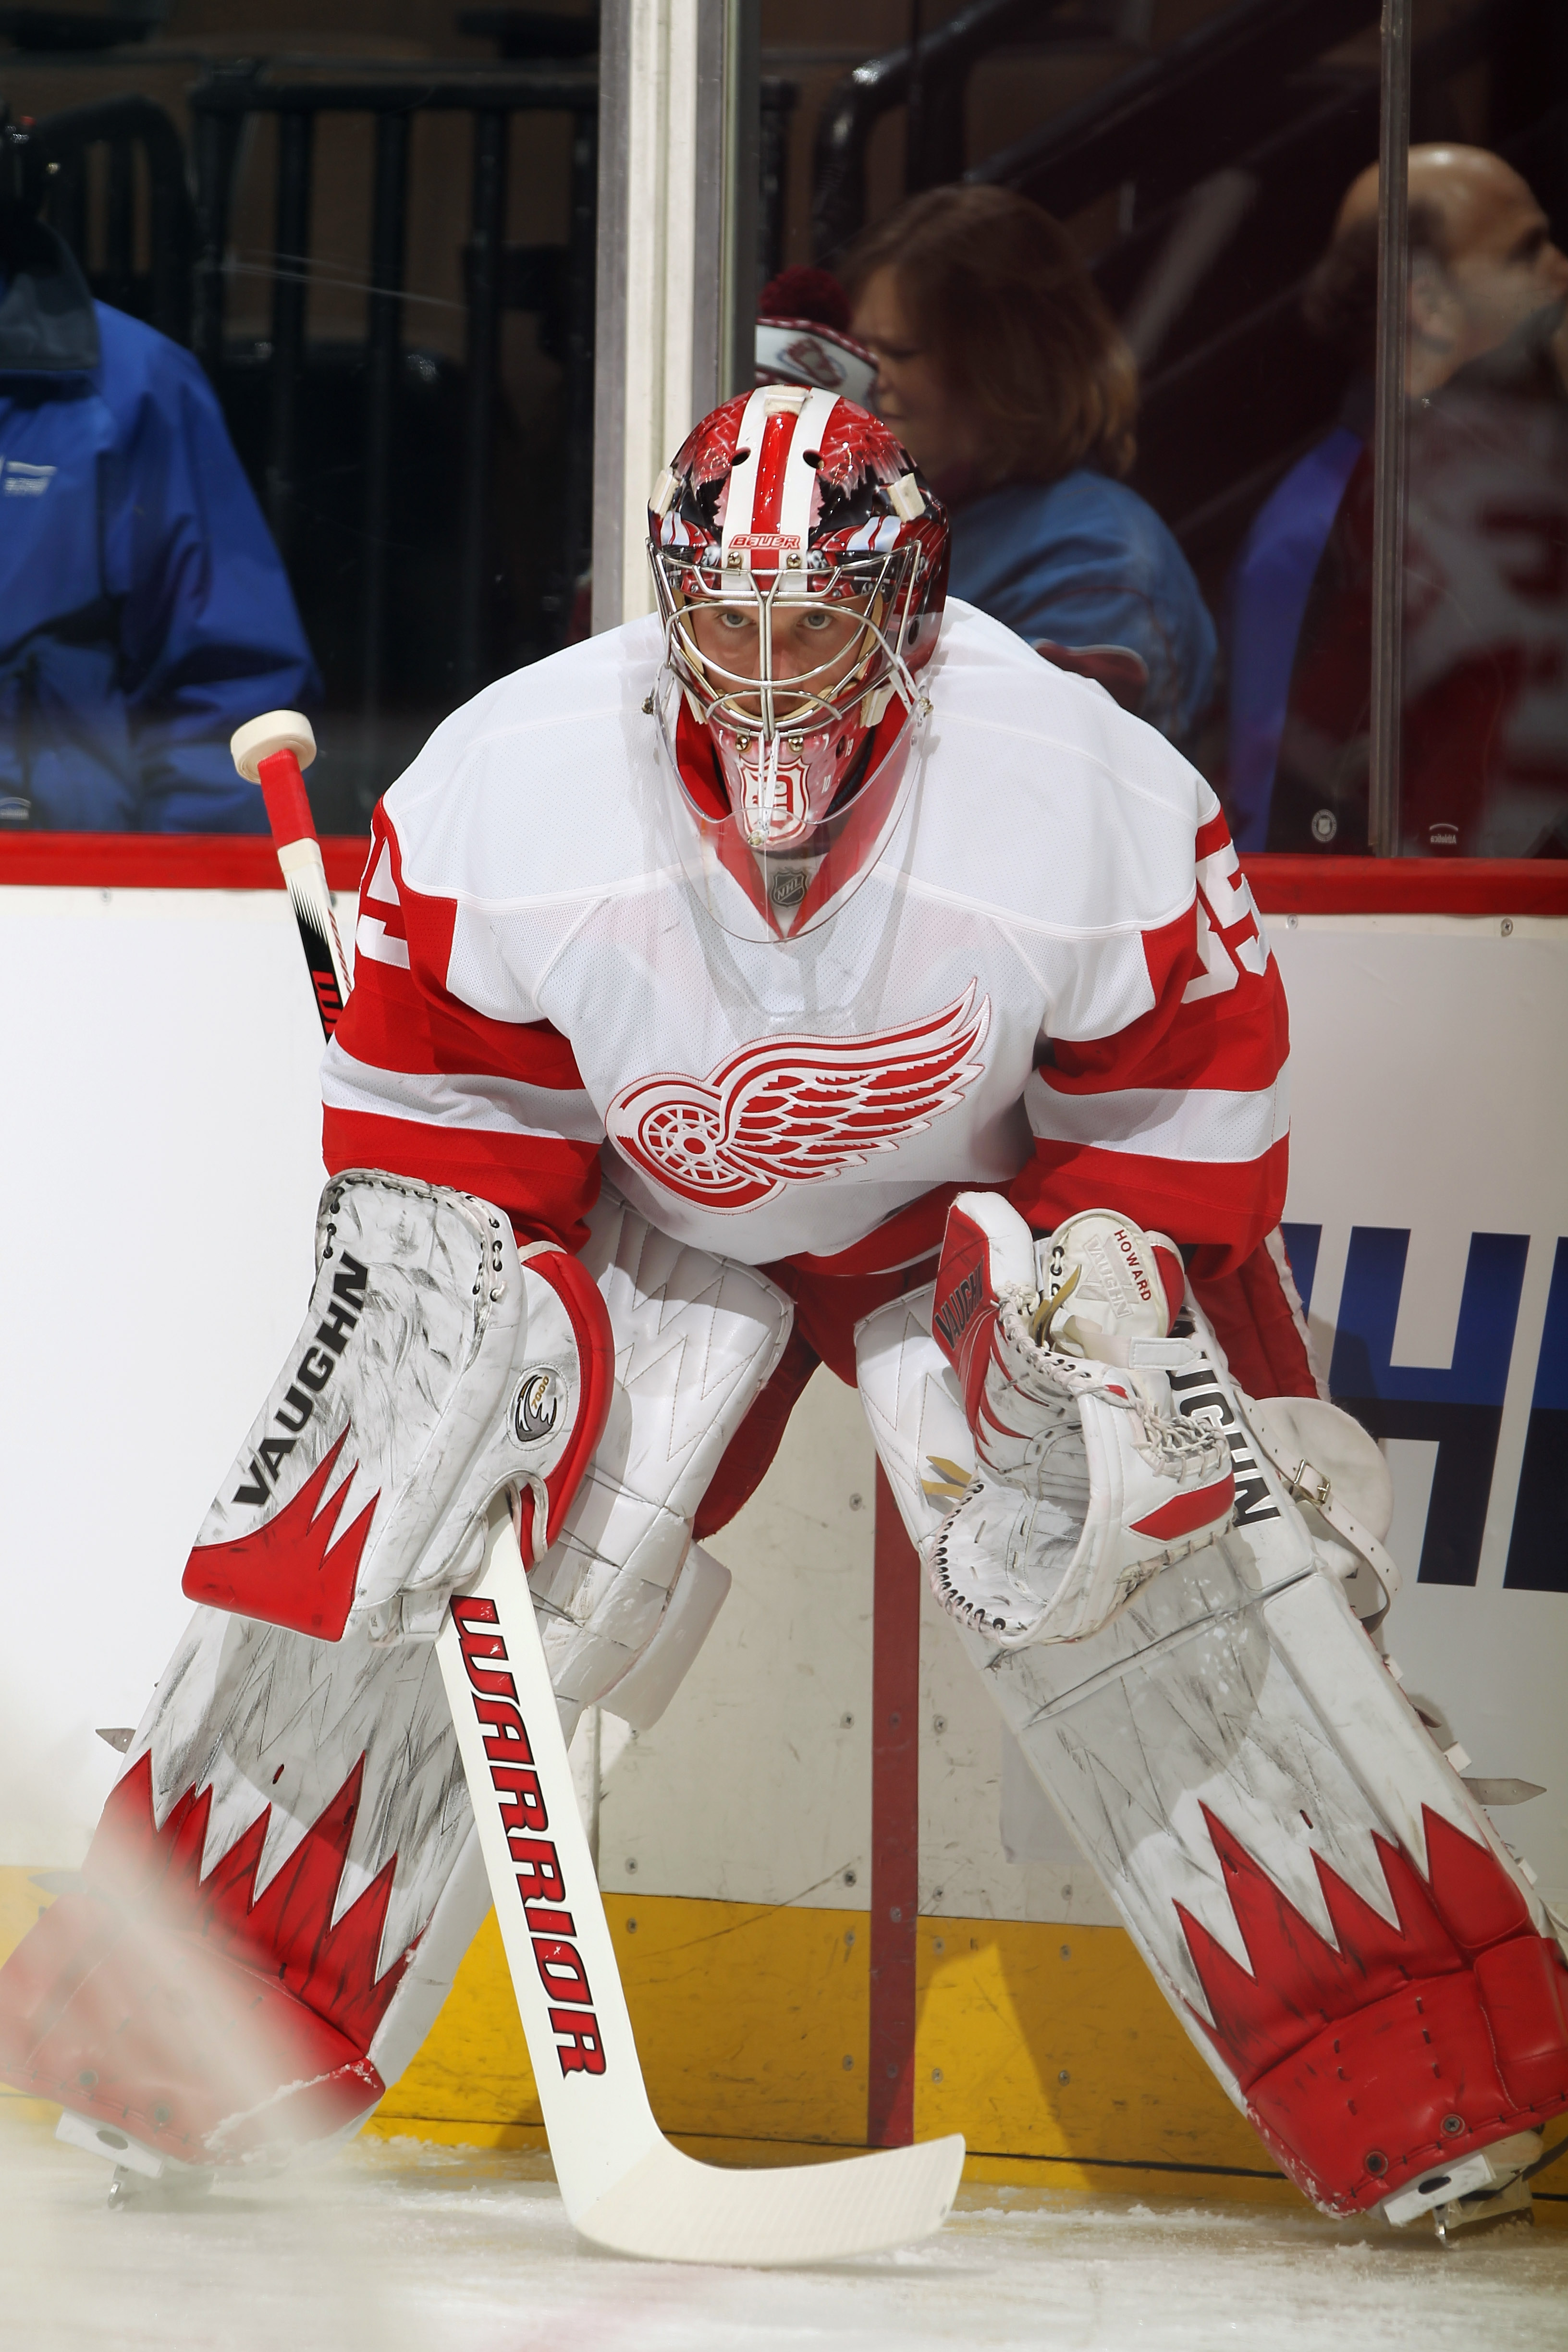 DENVER, CO - JANUARY 10:  Goalie Jimmy Howard #35 of the Detroit Red Wings warms up prior to facing the Colorado Avalanche at the Pepsi Center on January 10, 2011 in Denver, Colorado. The Avalanche defeated the Red Wings 5-4.  (Photo by Doug Pensinger/Get